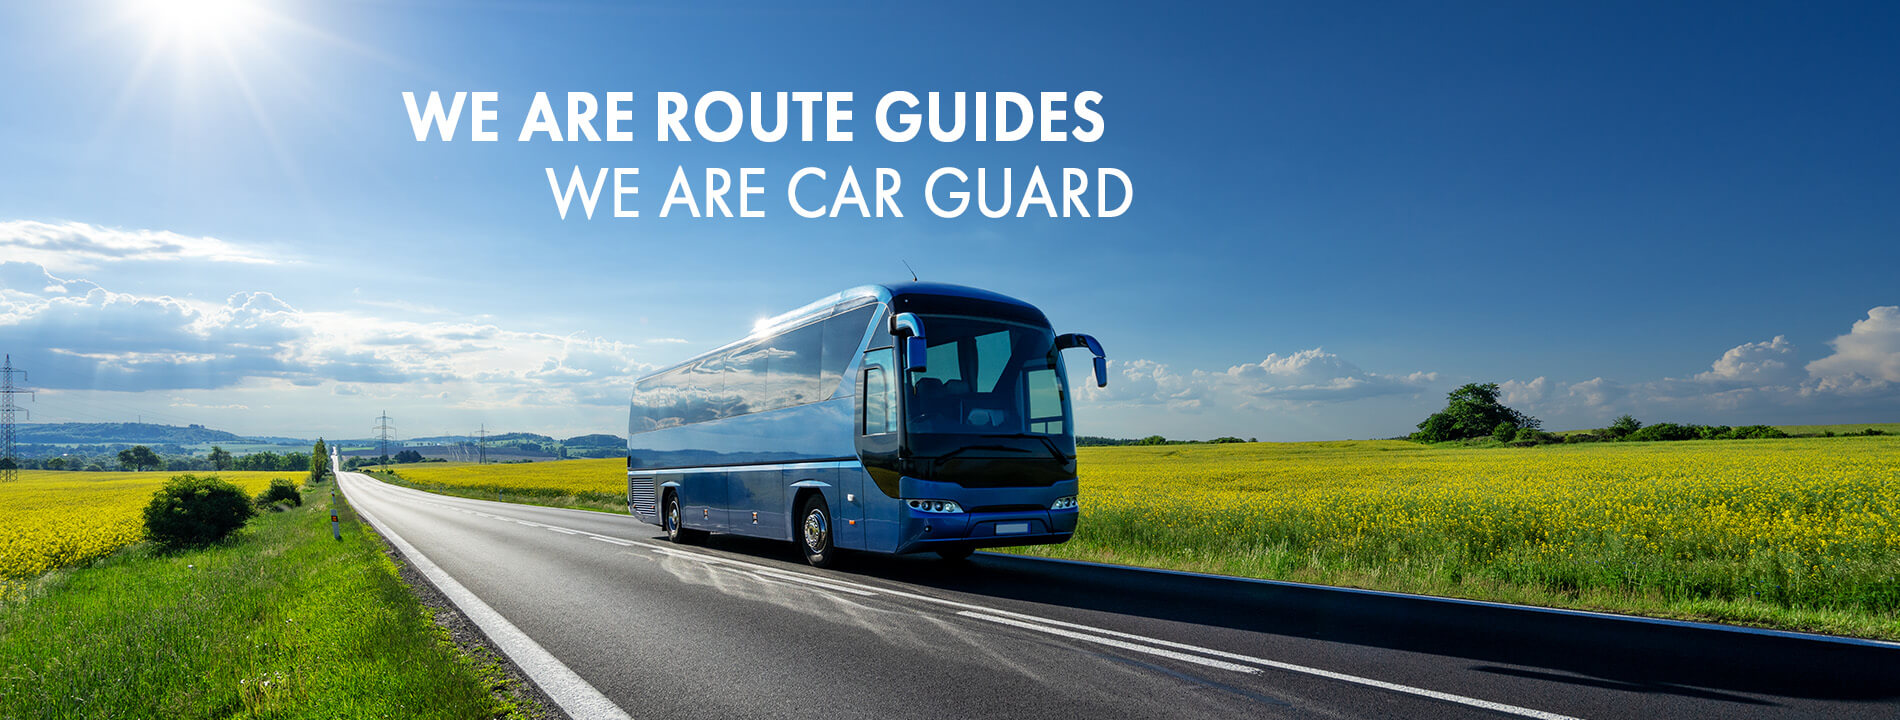 We are route guides - We are Car Guard